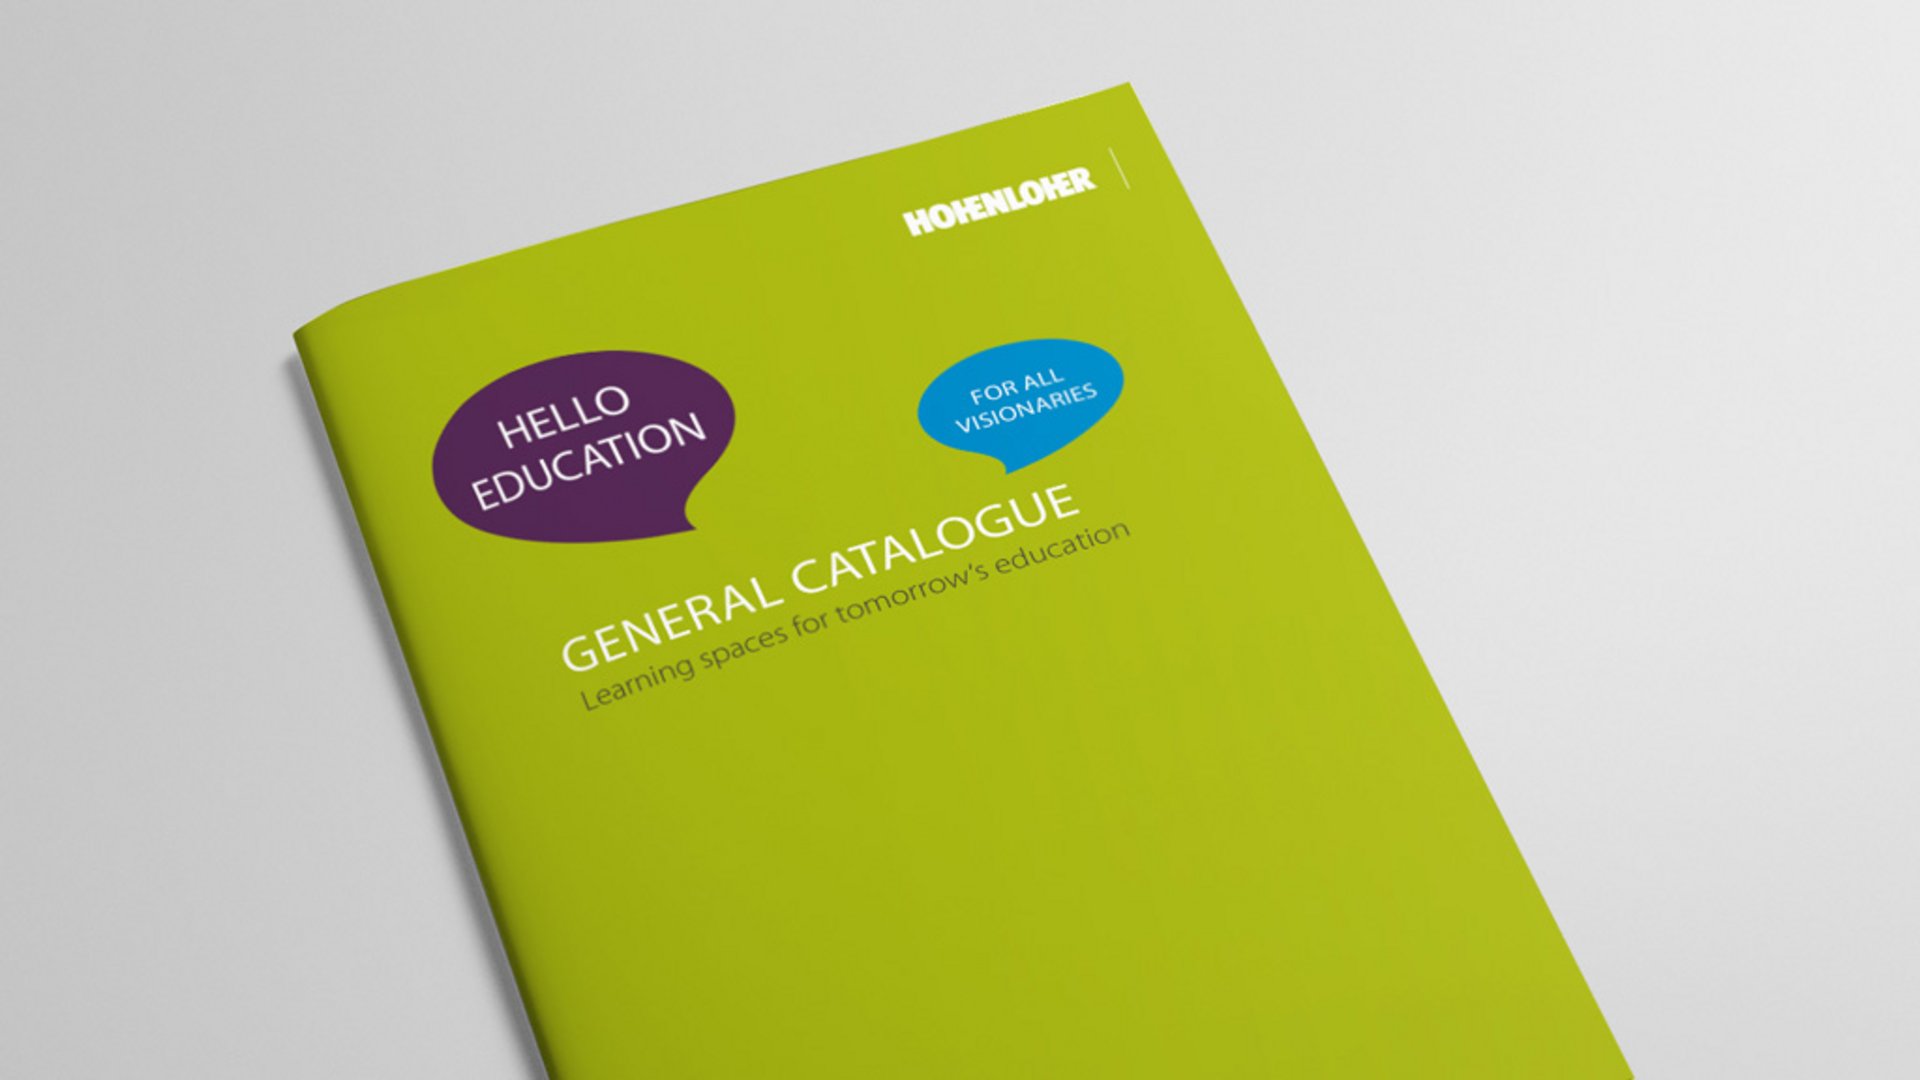 Hohenloher general catalogue